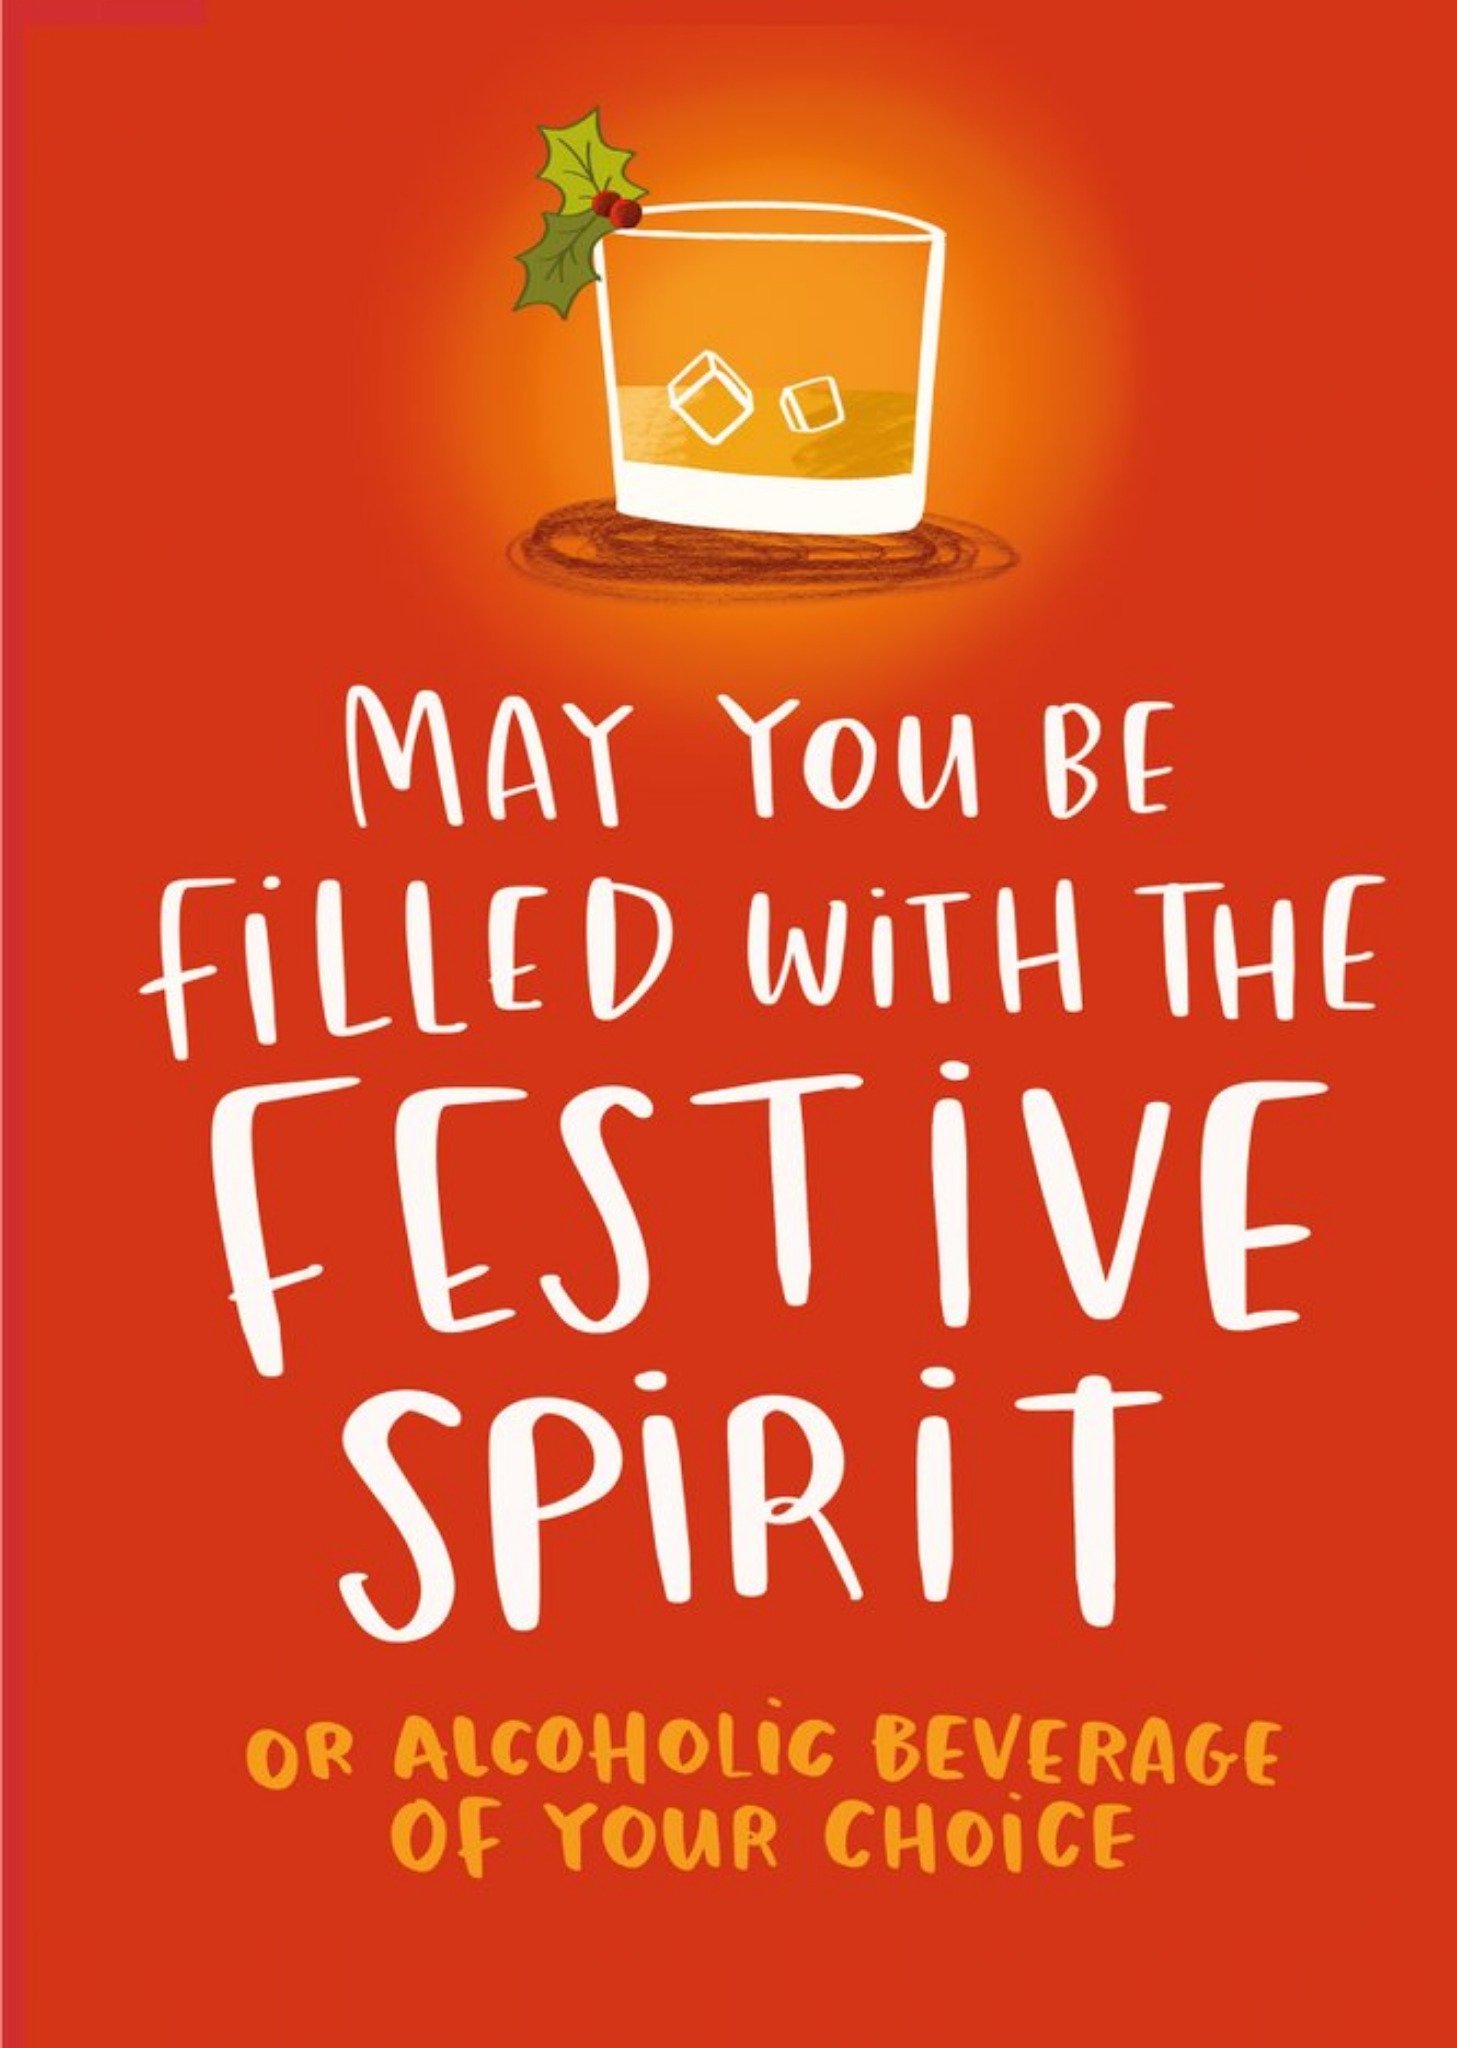 Moonpig Cute Illustration My You Be Filled With Festive Spirit Or Alcohol Of Your Choice Christmas C